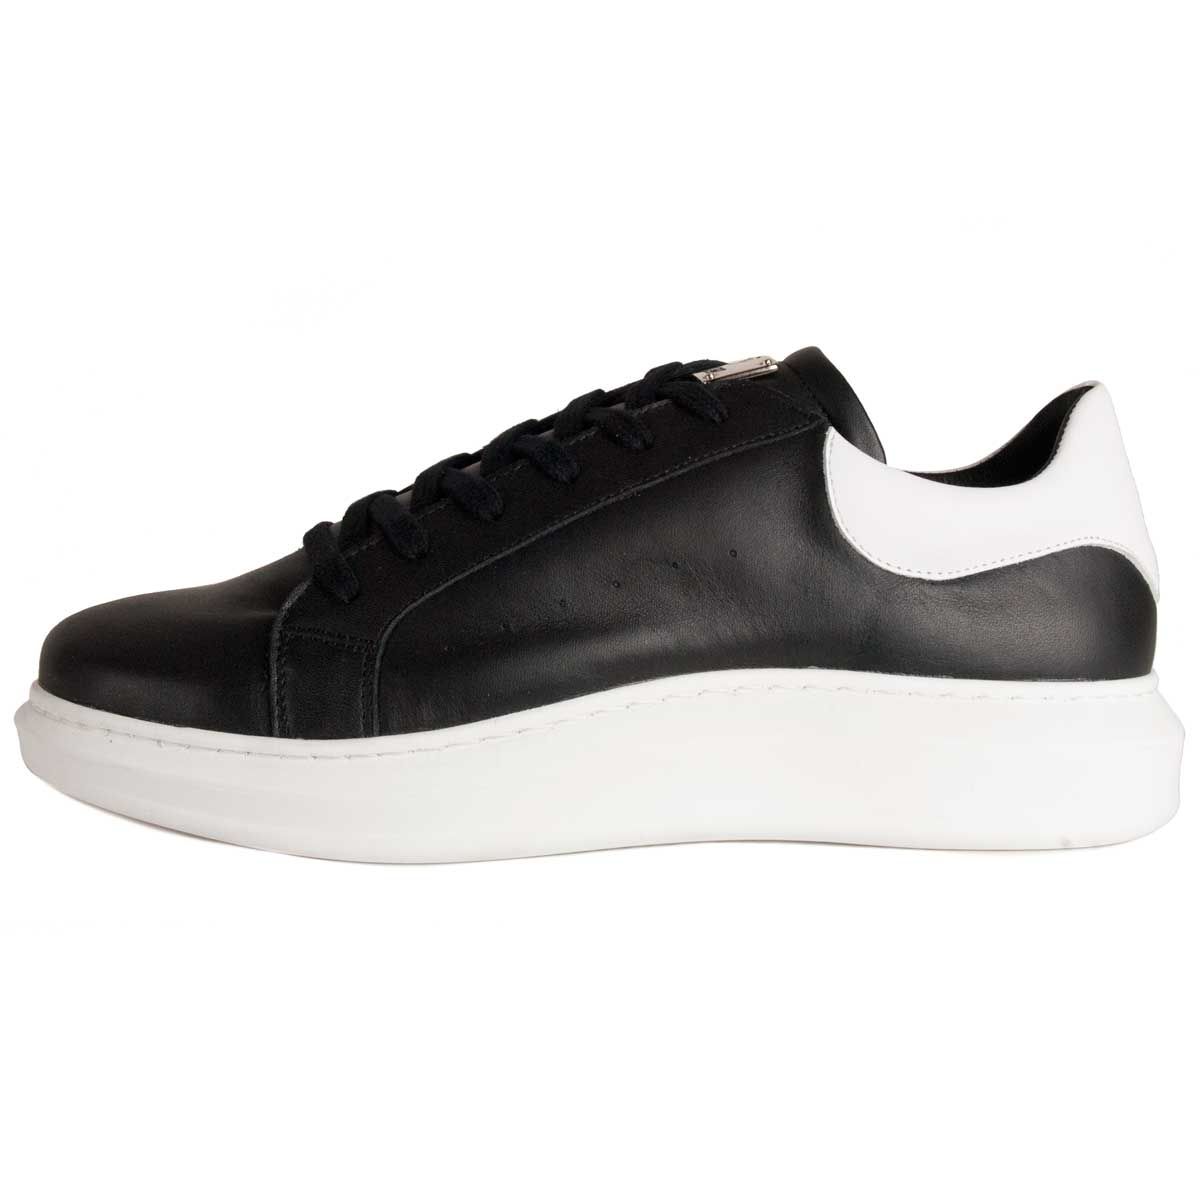 Sneaker low, black skin with white heel. Thermoformed template. White rubber sole.